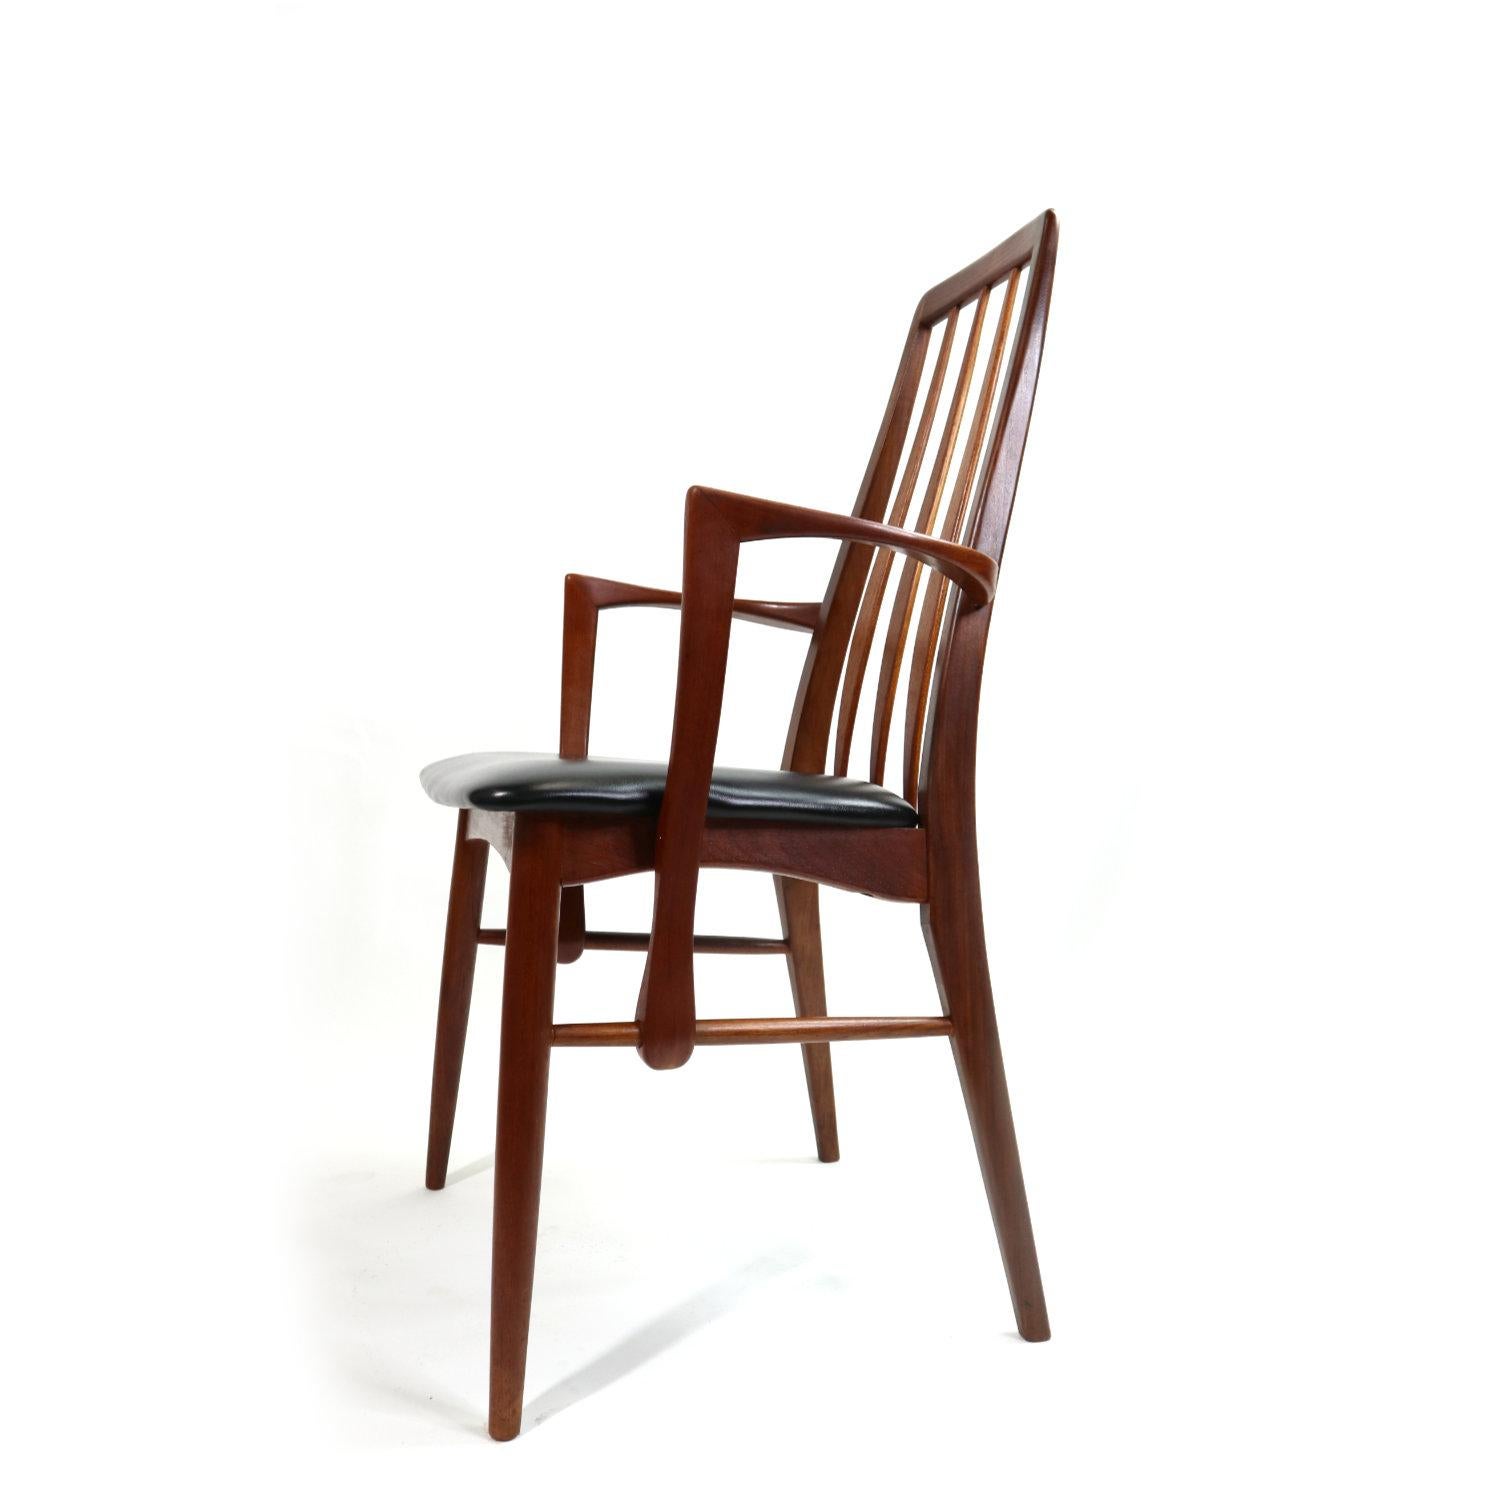 This stunning set of six teak 'Eva' dining chairs was designed by Niels Koefoed for Koefoeds Hornslet, circa 1964. These lightweight, but well built and sturdy beauties possess a solid teak frame with gently arched backs which give ergonomic